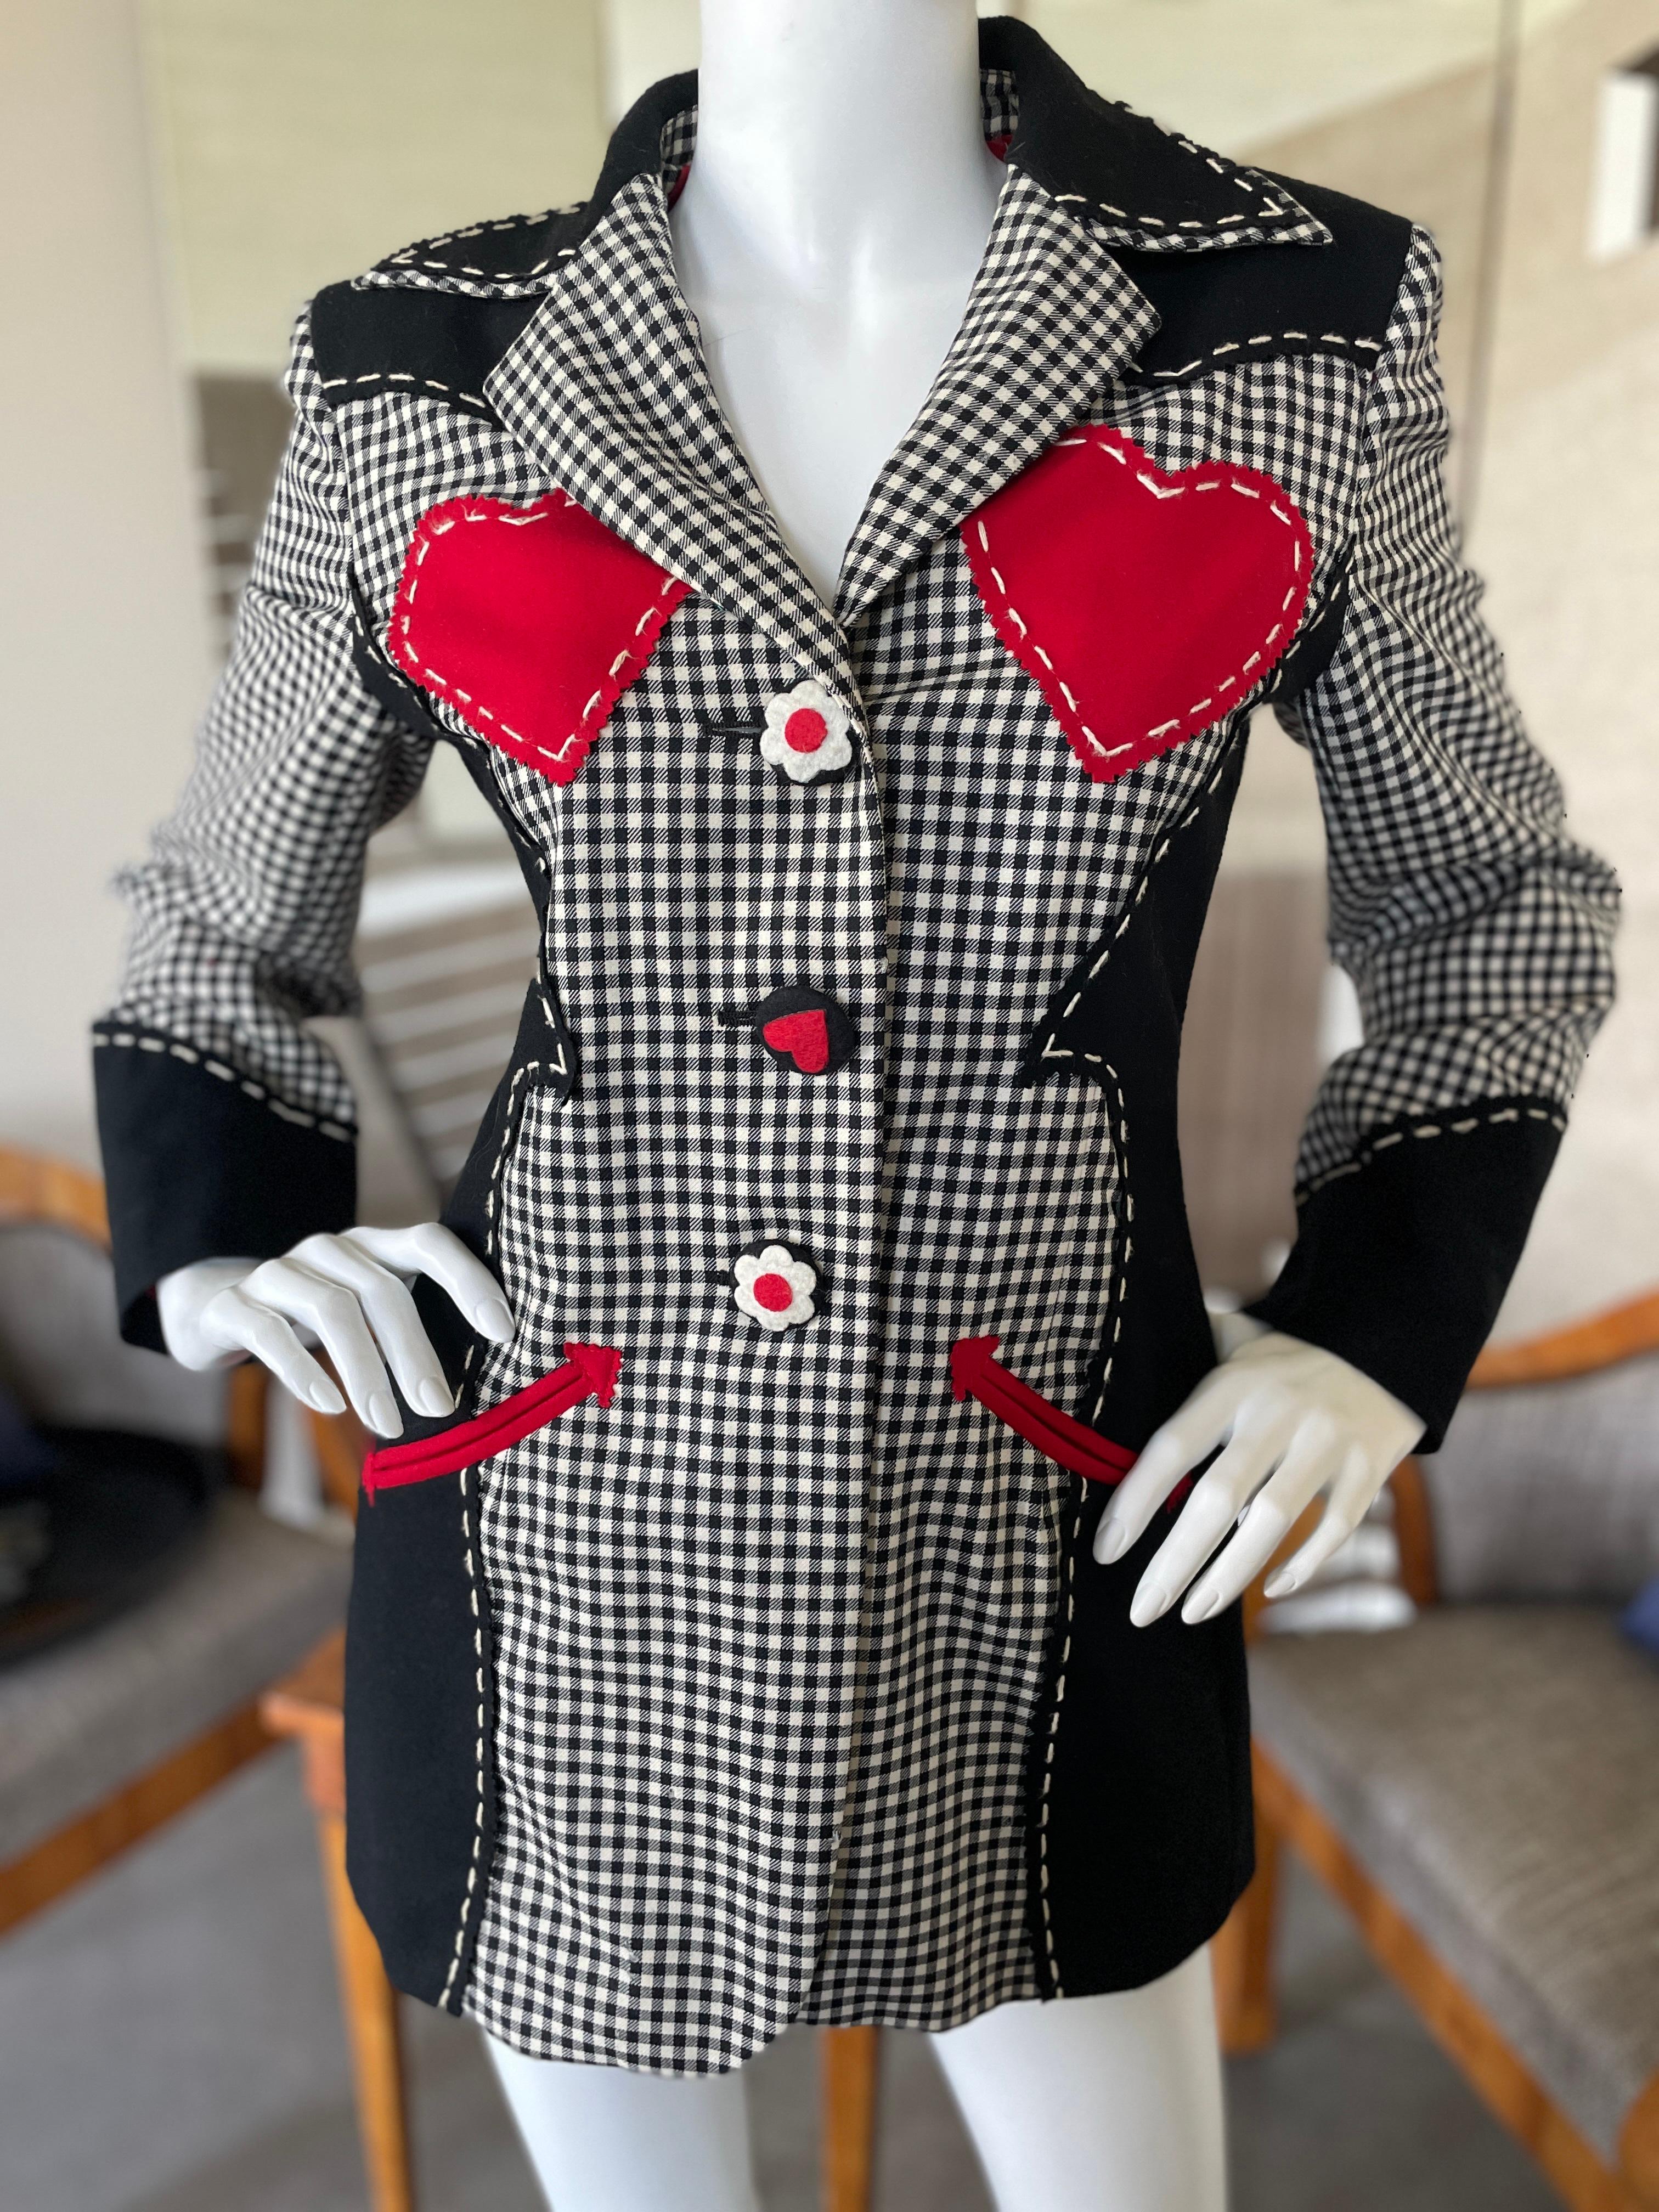 Moschino Cheap & Chic Vintage 80's Western Style Gingham Jacket with Heart's 
This is so fun and witty.
Italian sz 42   , US 8
Bust 36